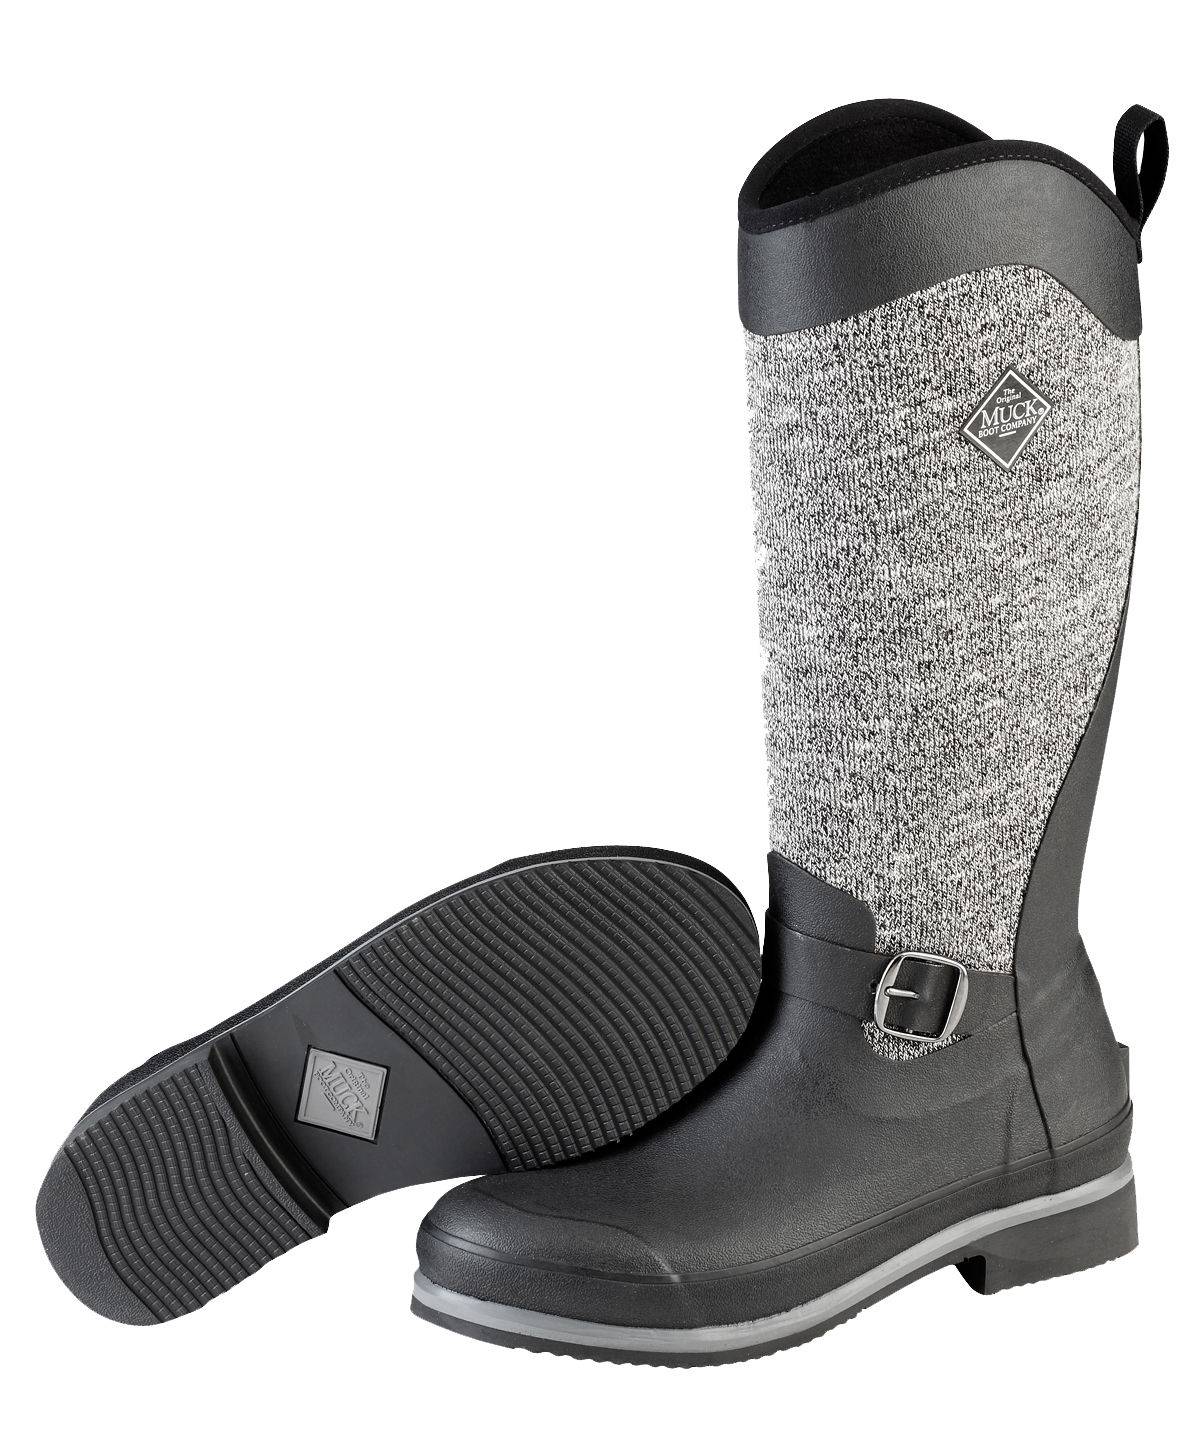 Muck Boots Reign Supreme Winter Boot - Ladies - Black Gray